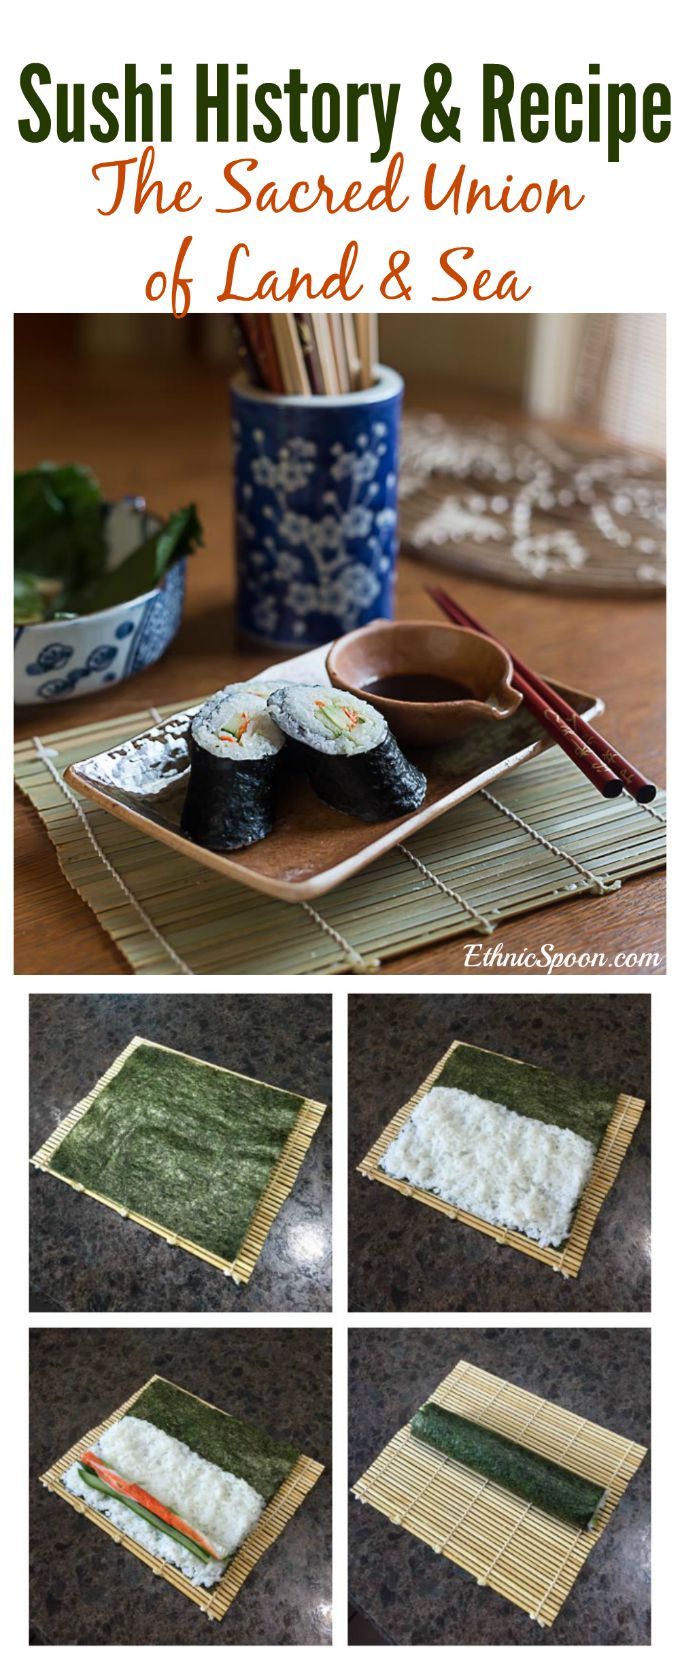 How to make crab or california roll sushi and the history of sushi. | ethnicspoon.com